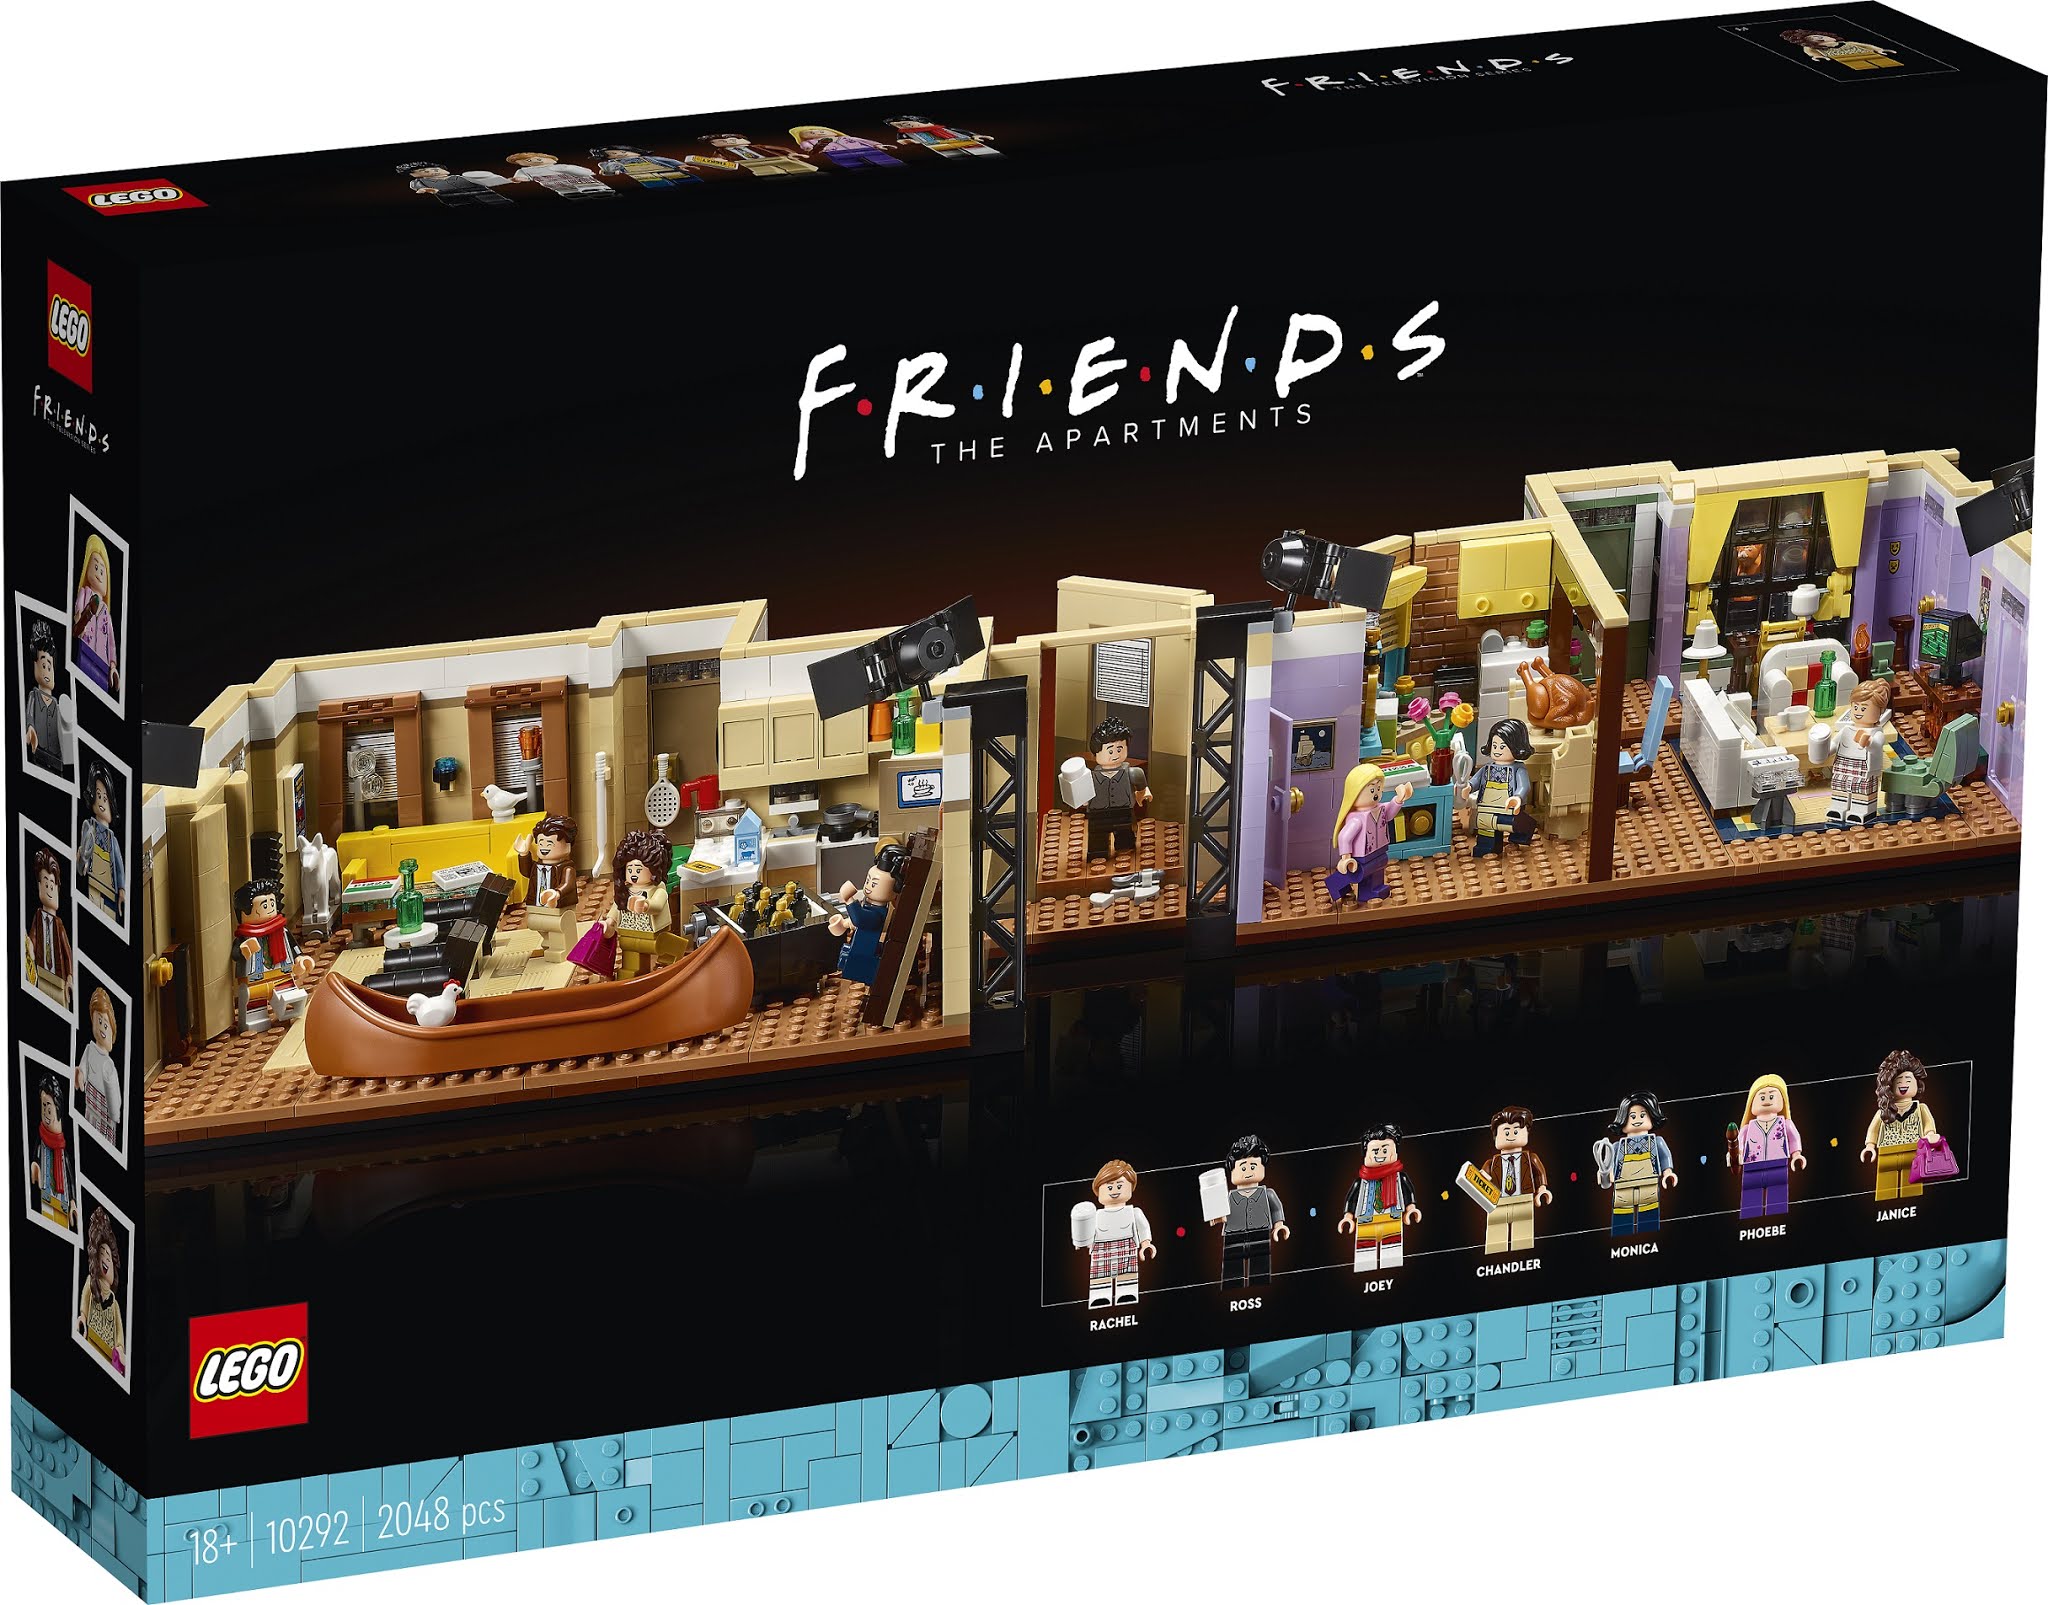 Fans can recreate their favorite scenes with new LEGO F.R.I.E.N.D.S Apartments Set